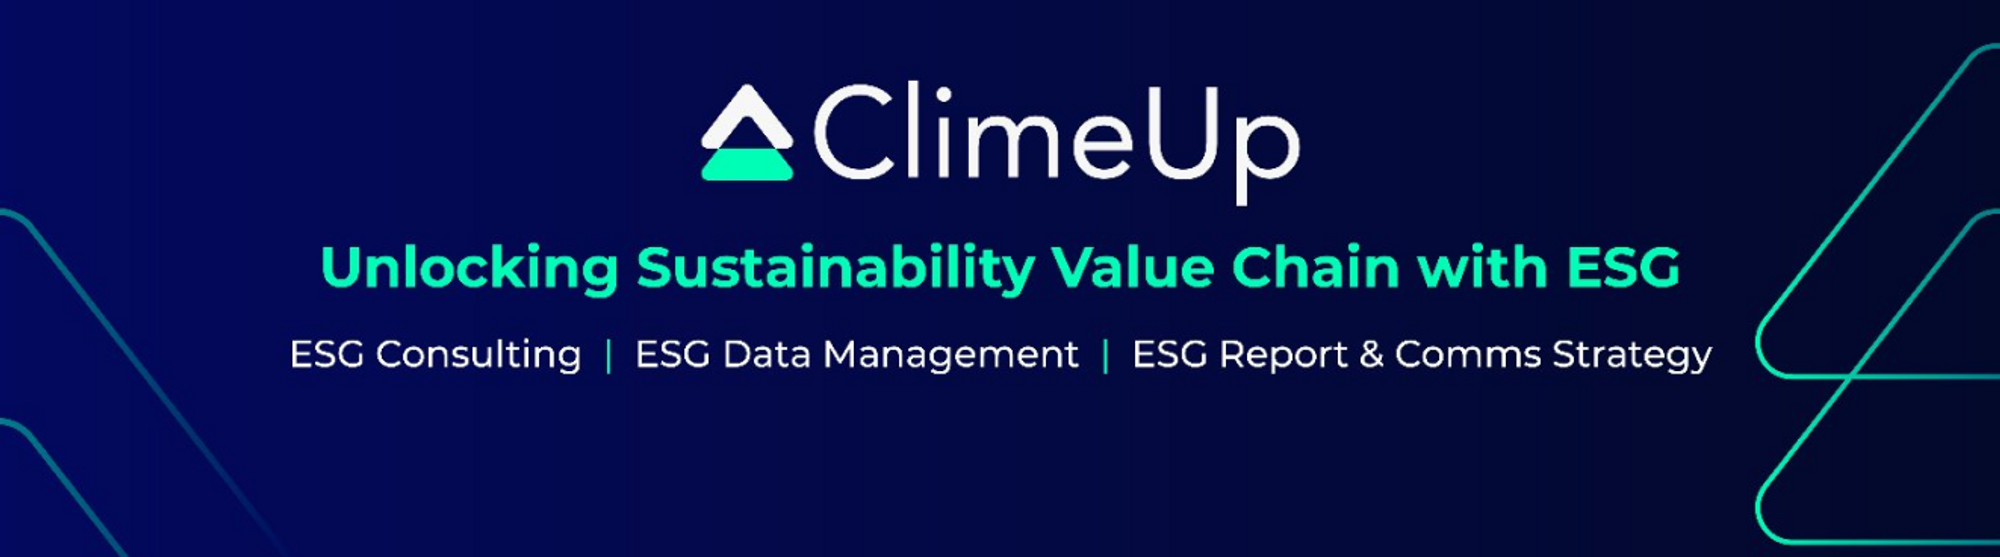 ClimeUp Cover Image